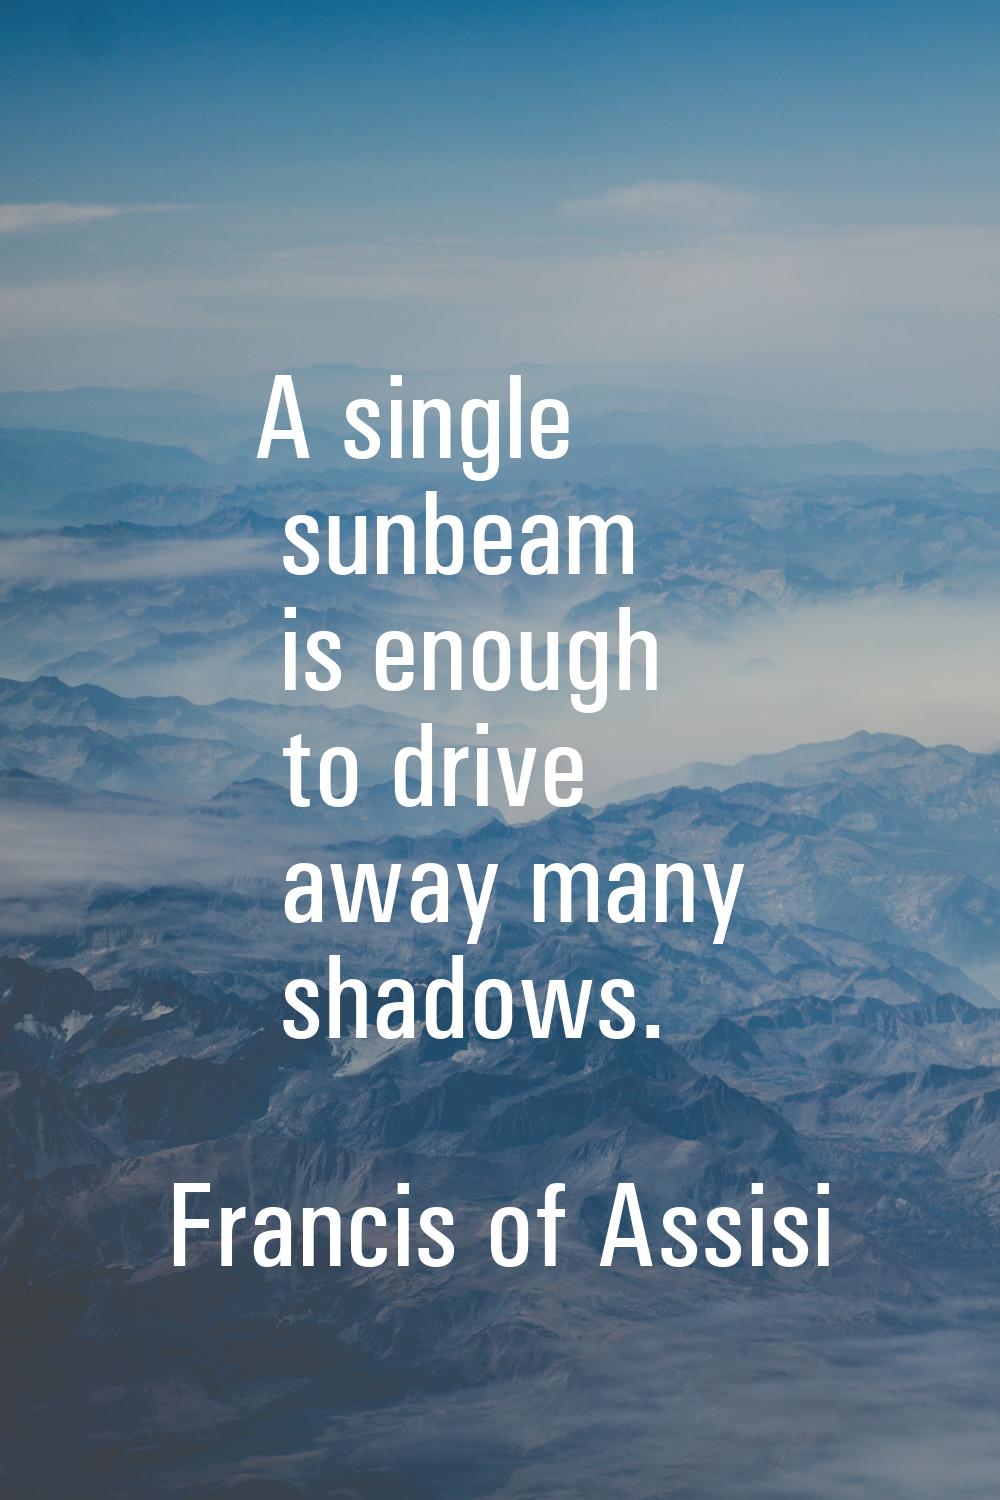 A single sunbeam is enough to drive away many shadows.